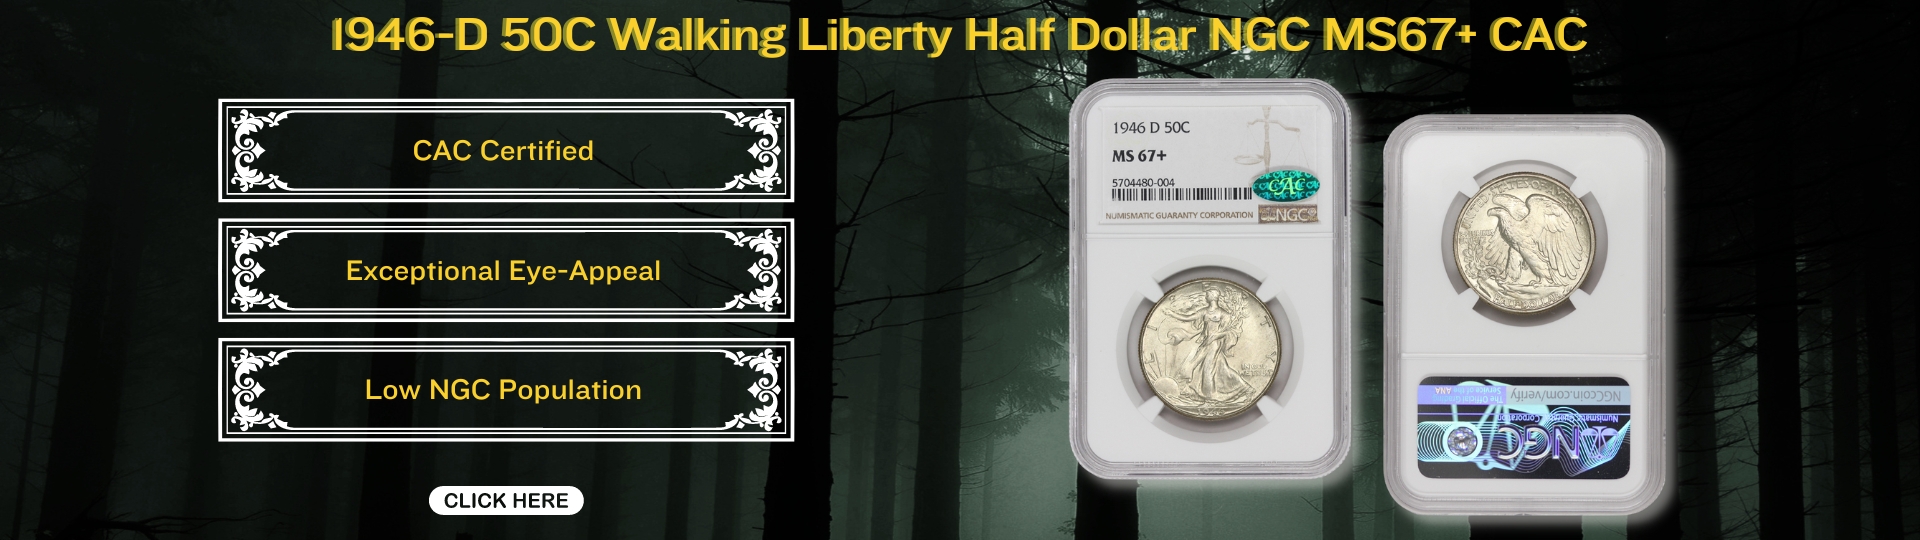 Nineteen forty six fifty cents silver walking liberty half dollar graded M S sixty seven plus by N G C and is CAC certified